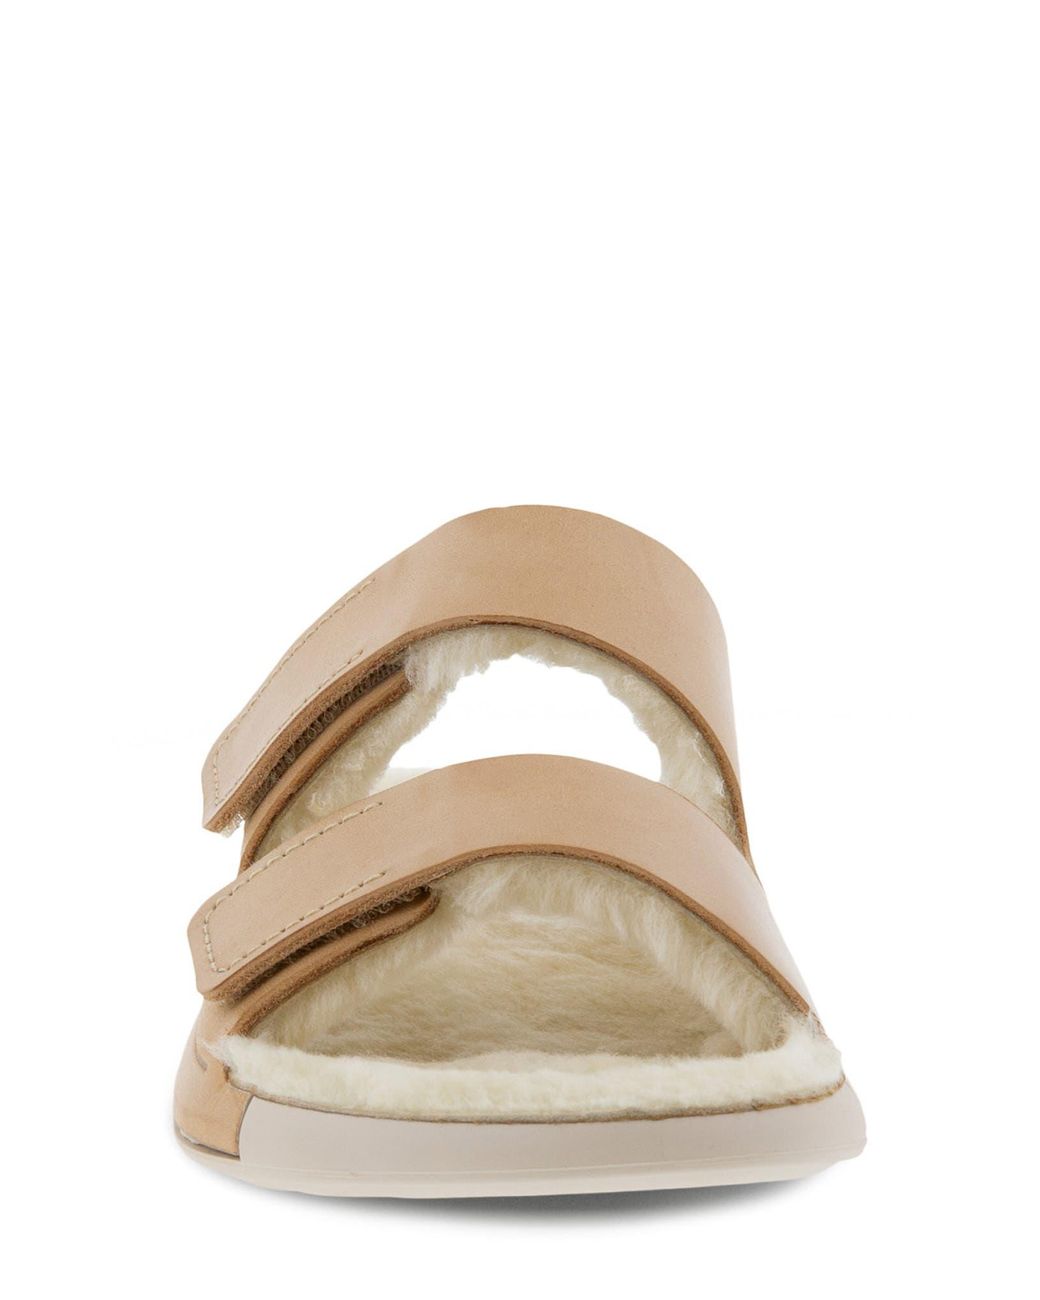 Ecco Cozmo Wool Lined Slide Sandal in Natural | Lyst